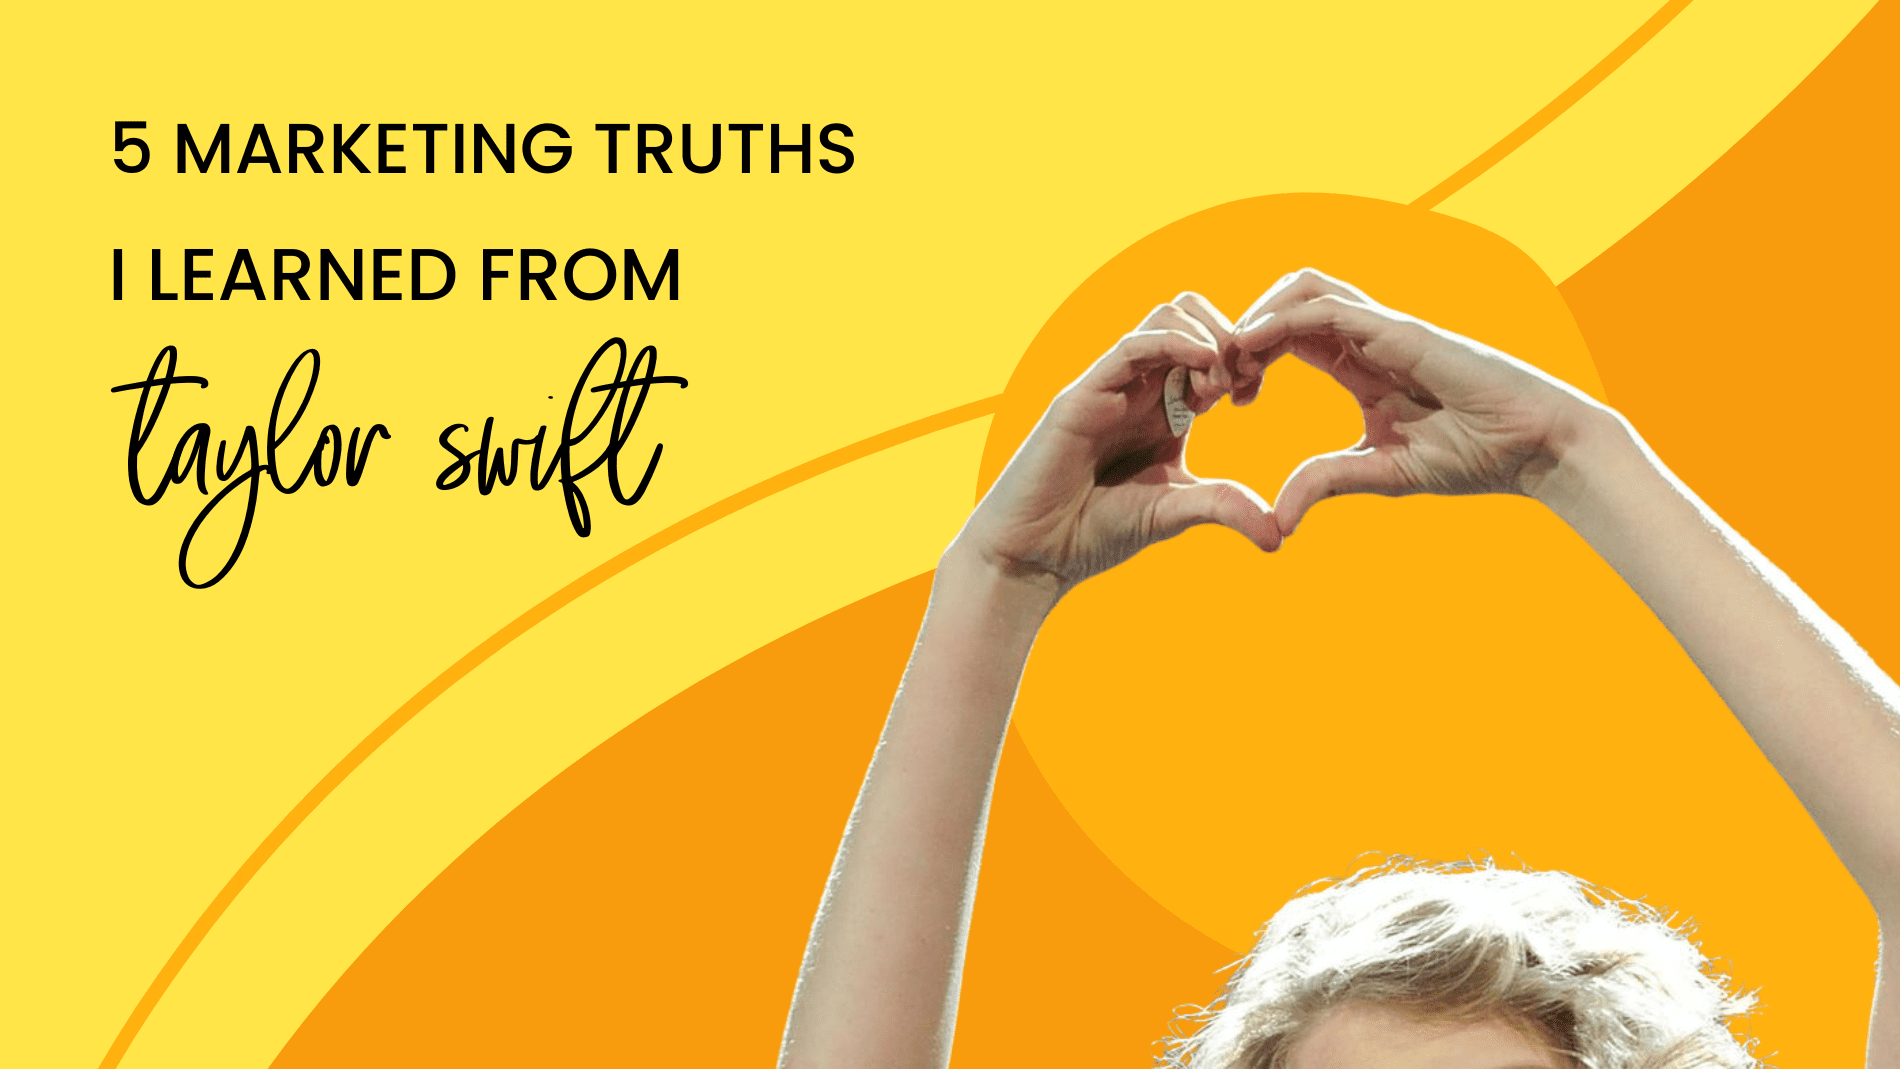 5 Truths I Learned from Taylor Swift Marketing